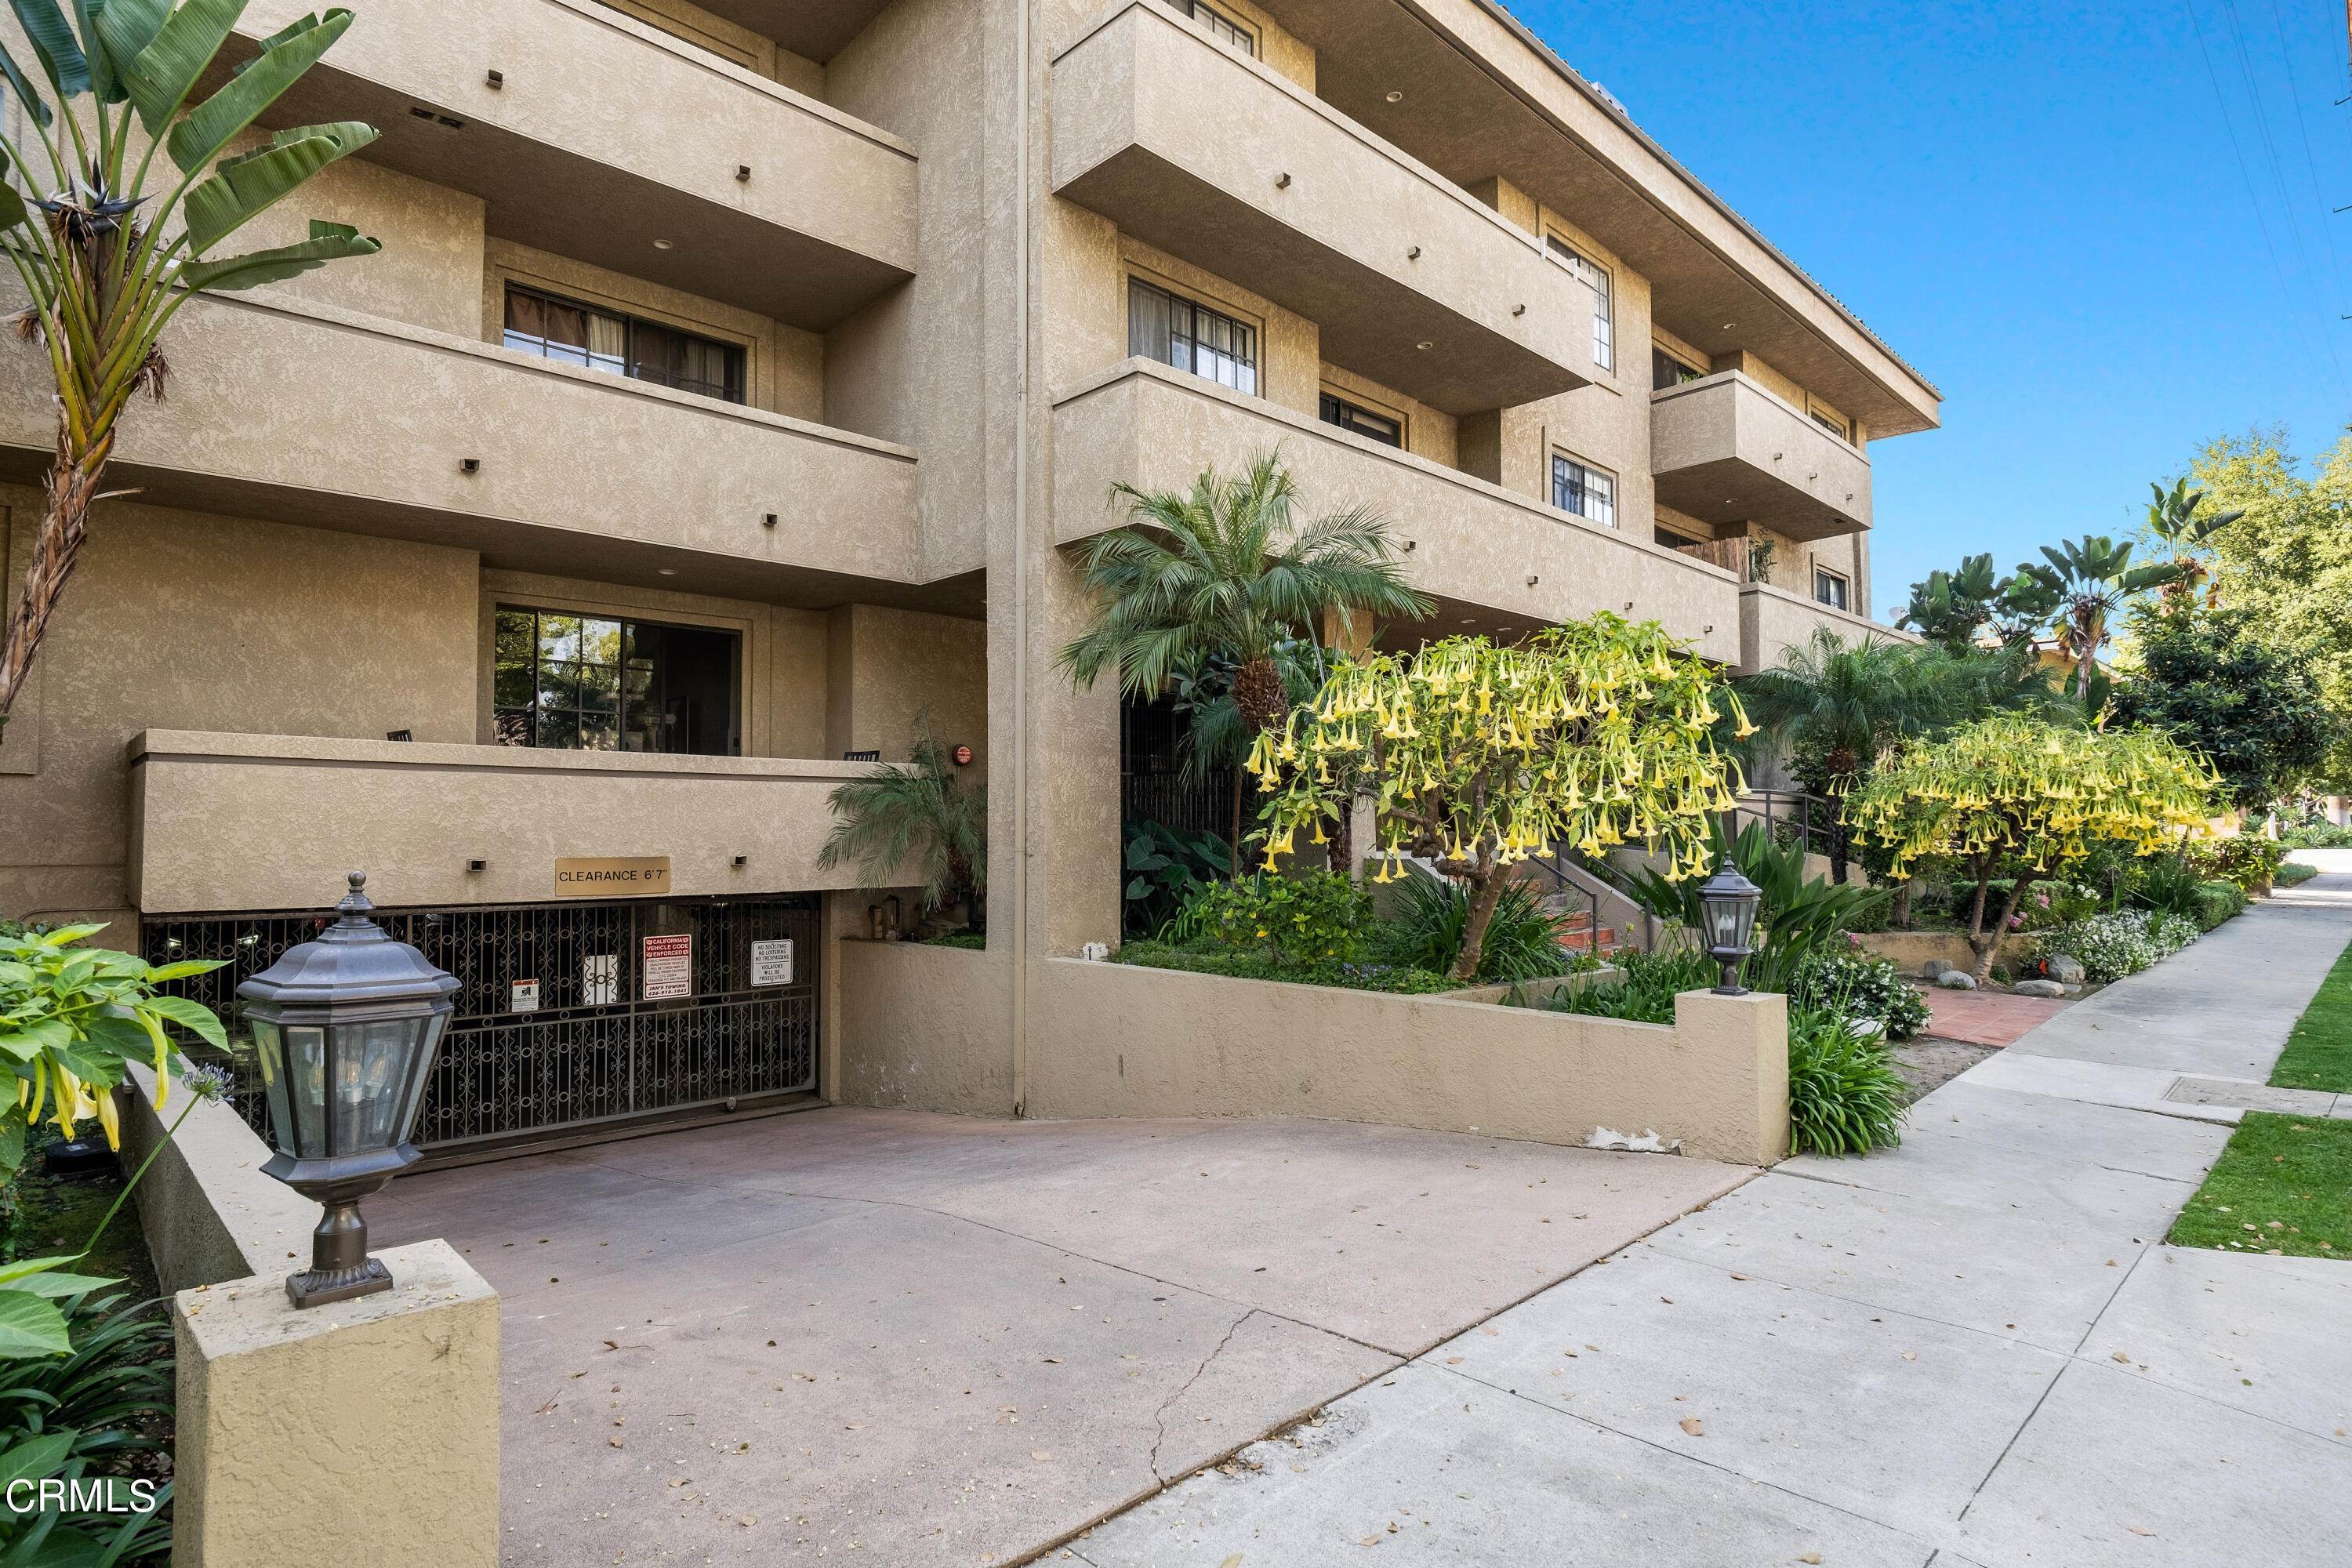 29. Condominiums for Sale at 221 South Oak Knoll Avenue 205 #205 221 South Oak Knoll Avenue 205 Pasadena, California 91101 United States